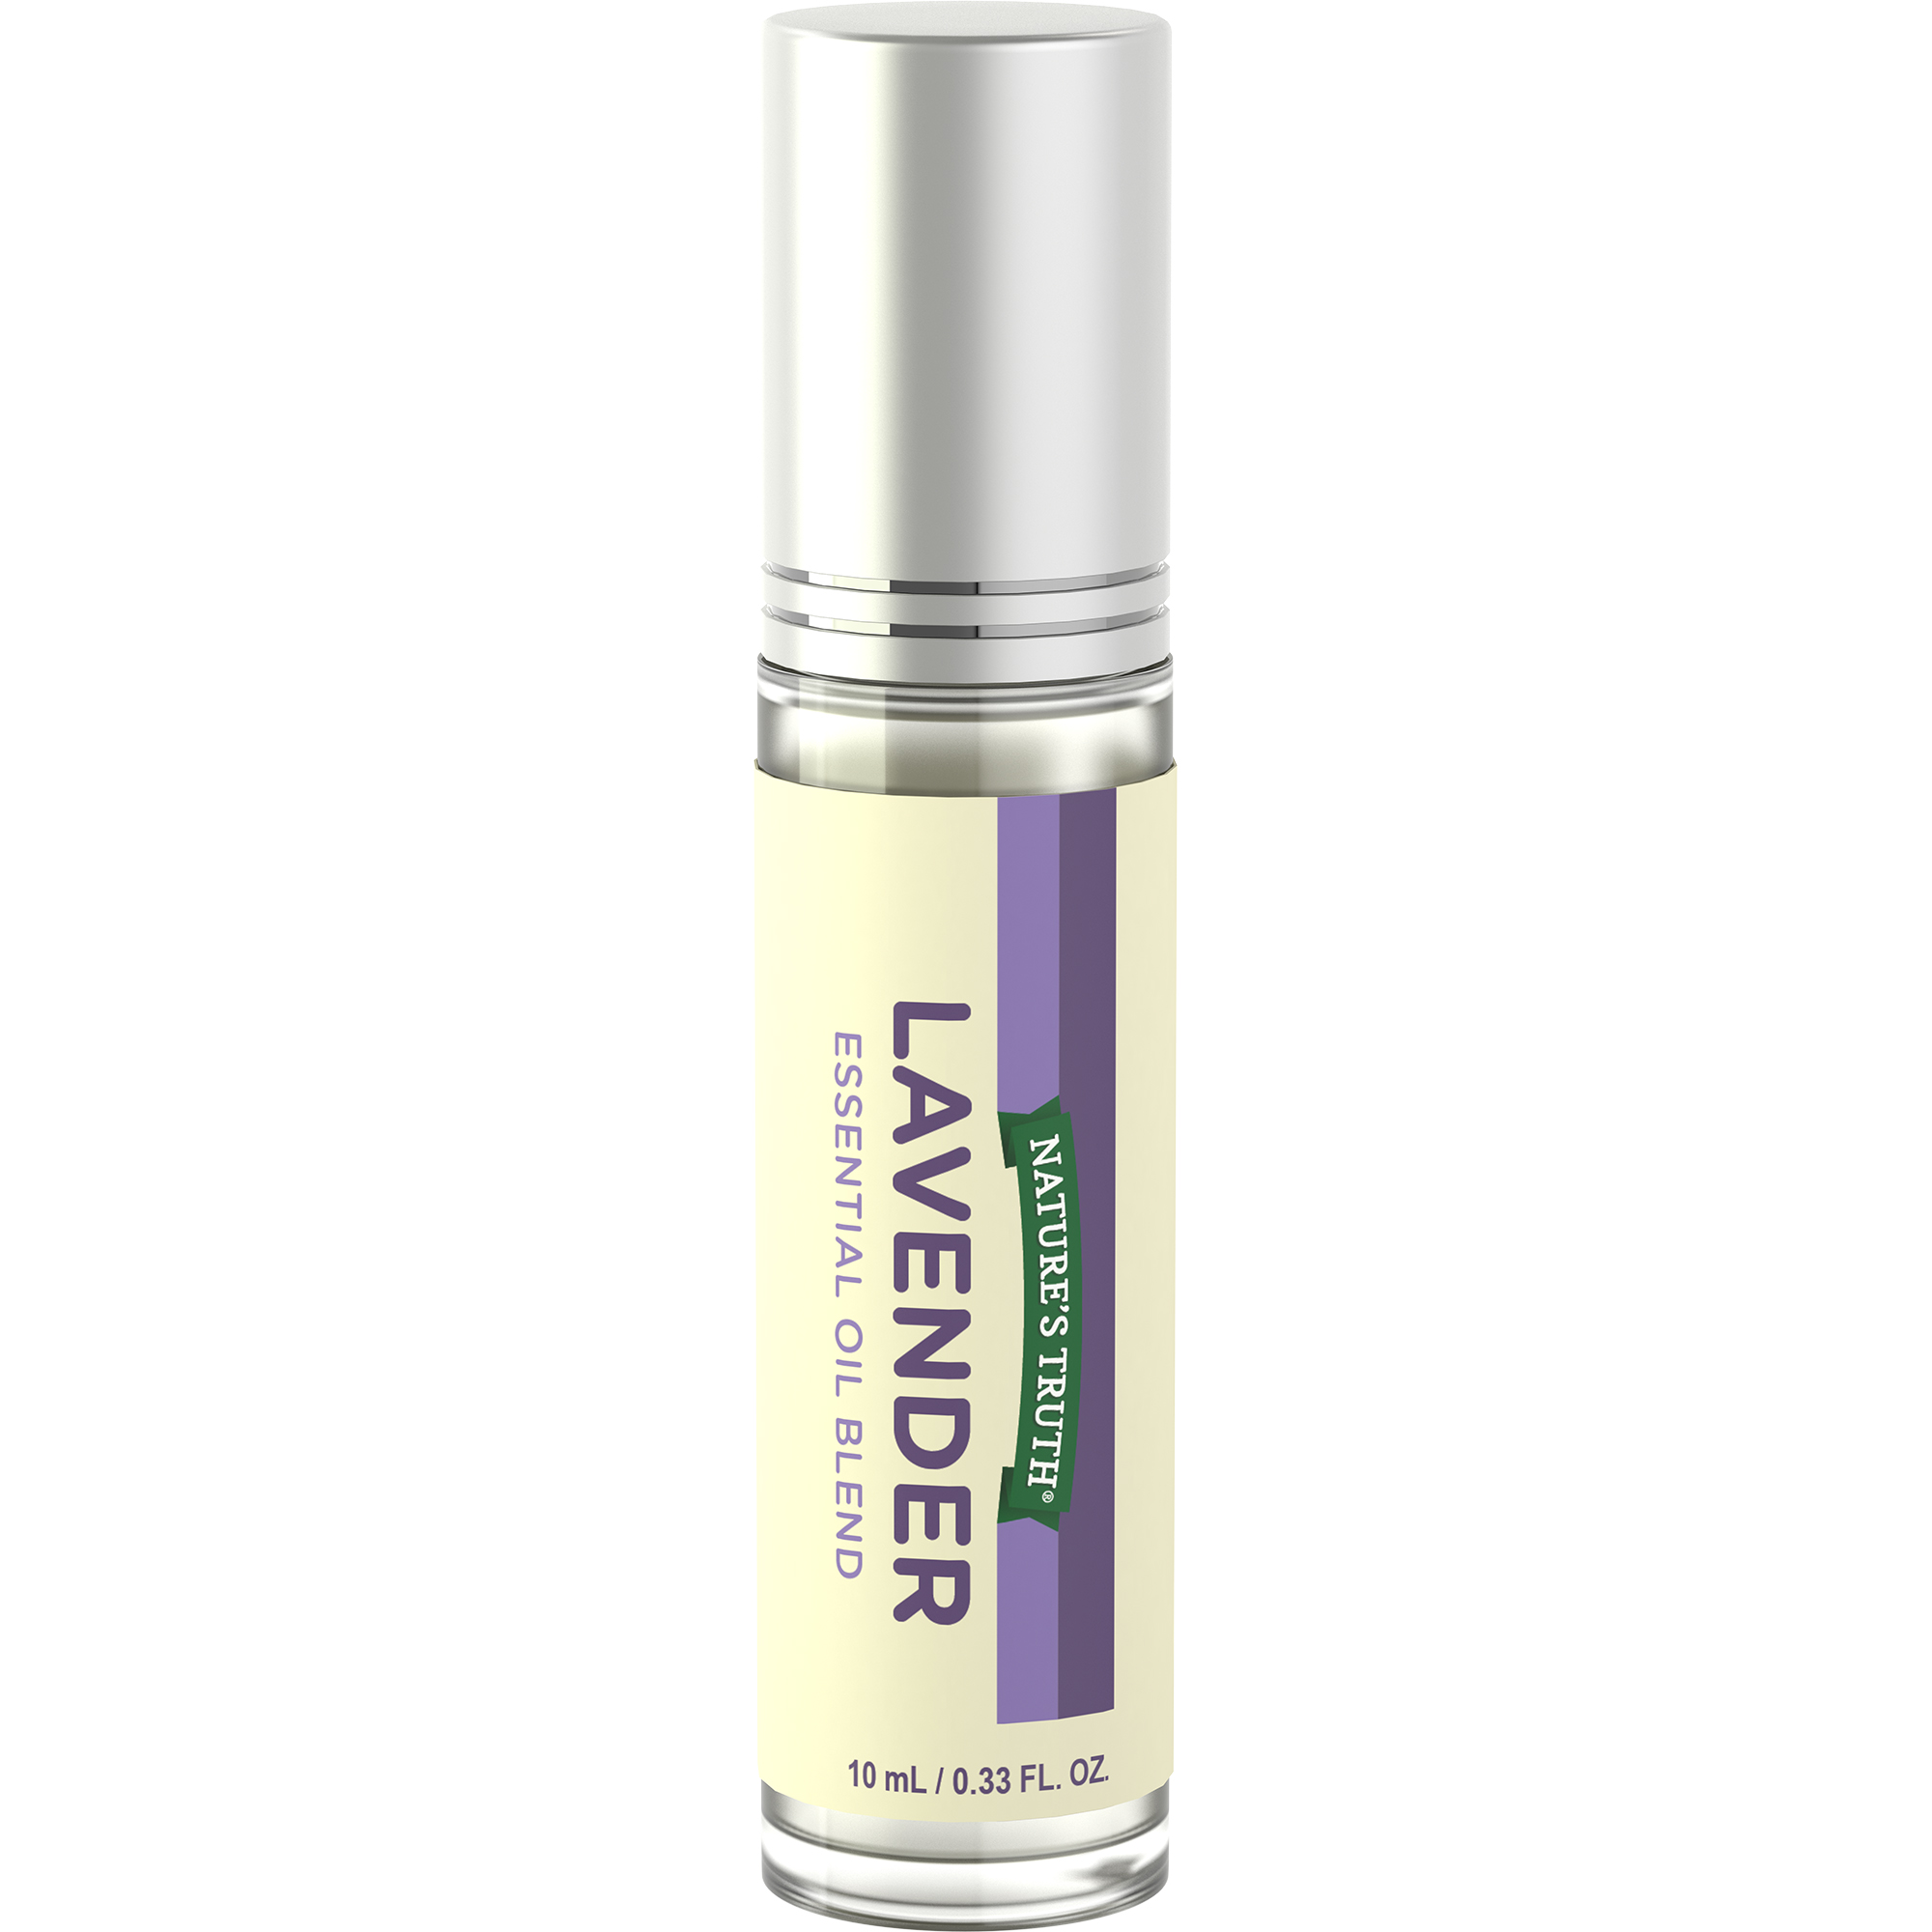 Lavender Essential Oil Roll On | Soothing Blend | 10 mL | GC/MS Tested | By Nature's Truth - image 3 of 4